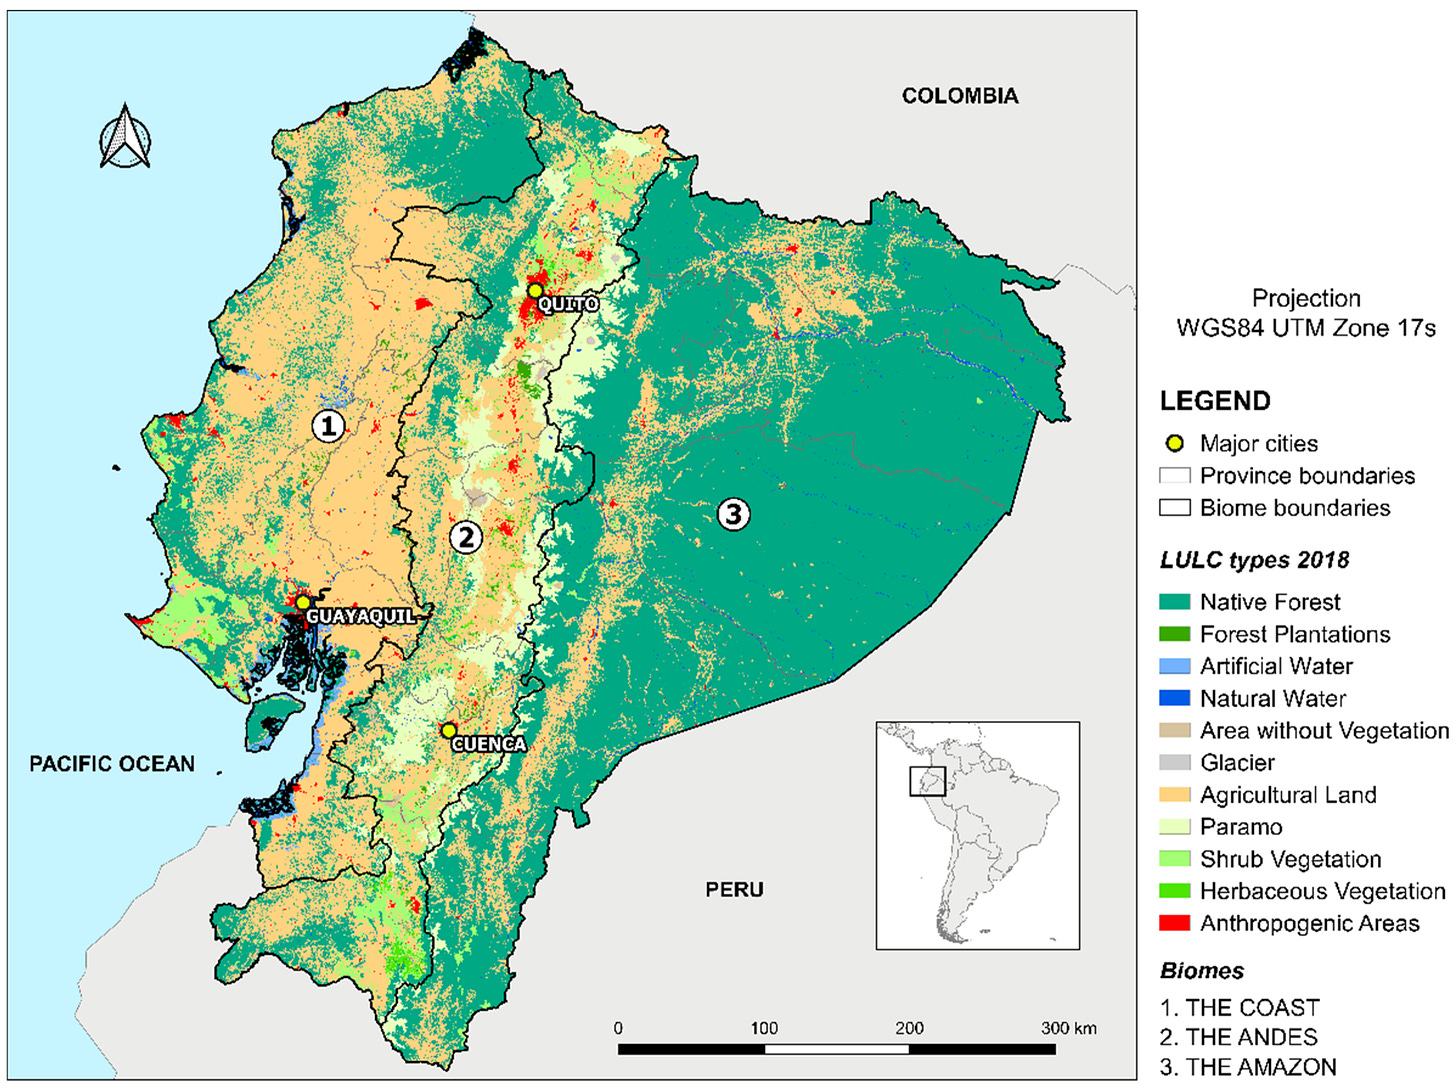 a map of ecuador broken up by different groundcover types. the entire astern half of the country is green, with a north-south strip of tan, denoting agricultural land. most of the western half of the country is tan, speckled with bits of darker and lighter green, denoting mostly agricultural land interspersed with forest.